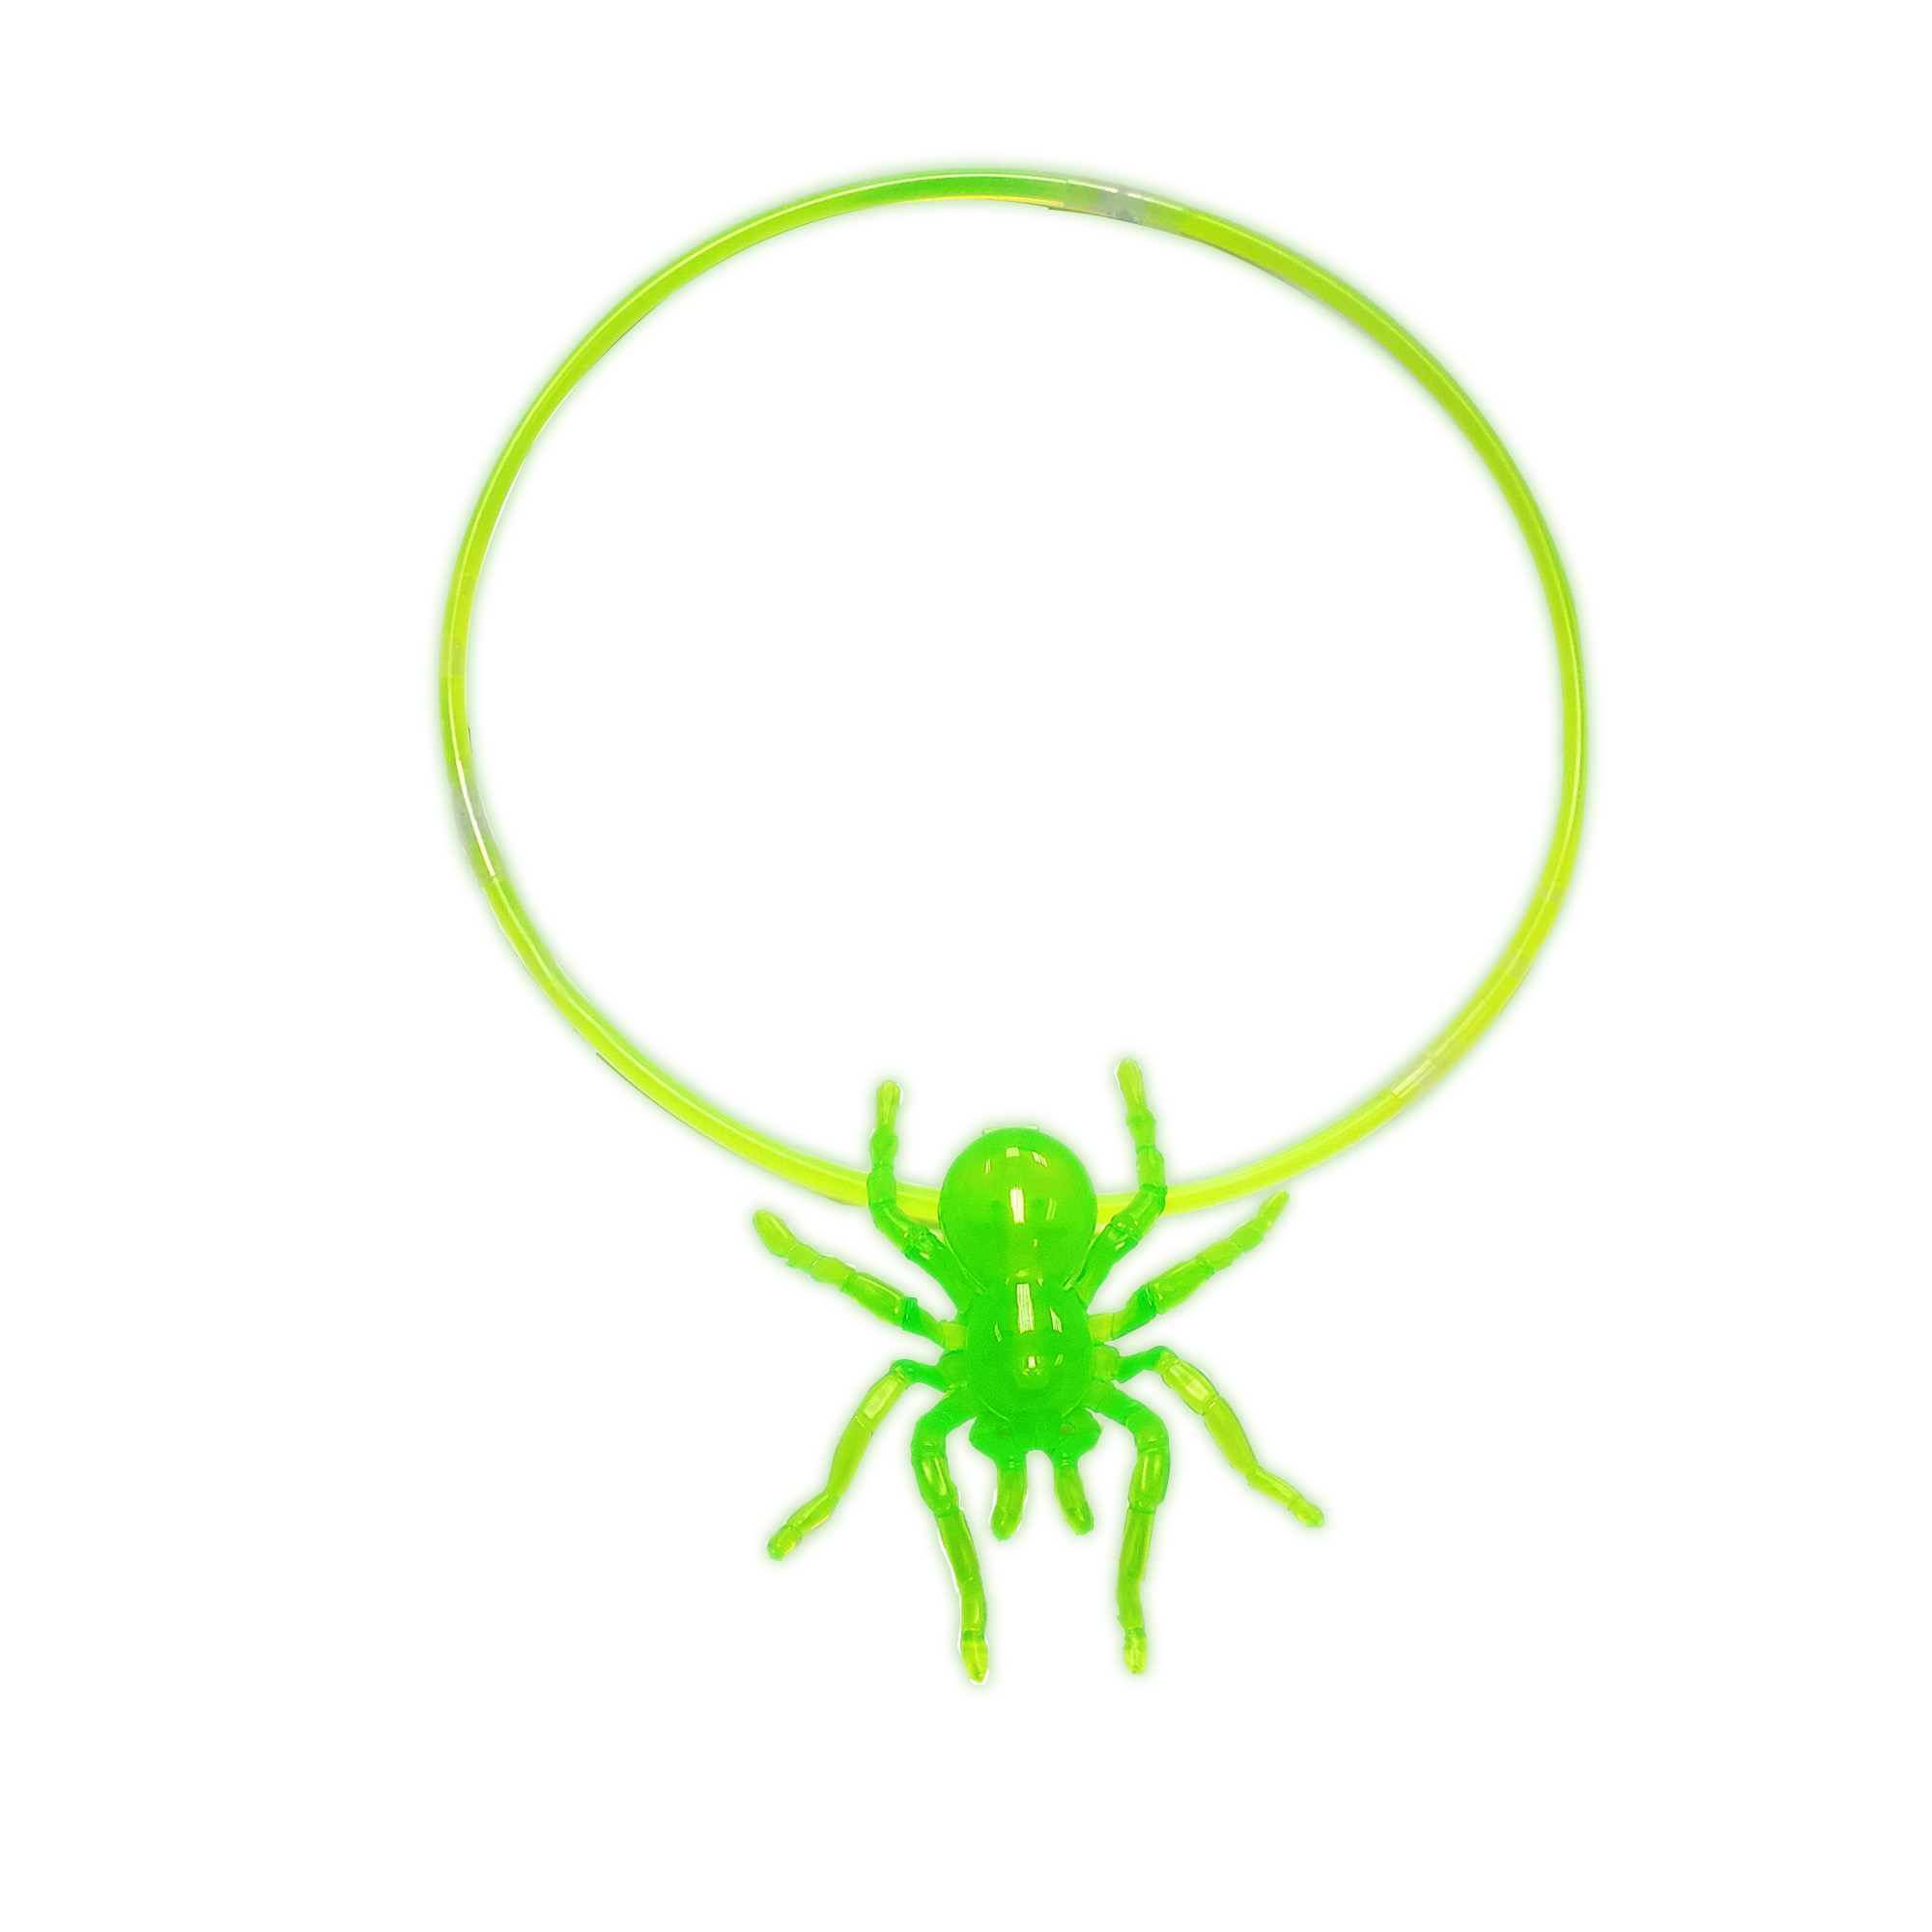 Vendor Labelling Halloween 1ct Green Glow Spider Necklace, Unisex - Childs and Adults - image 4 of 7